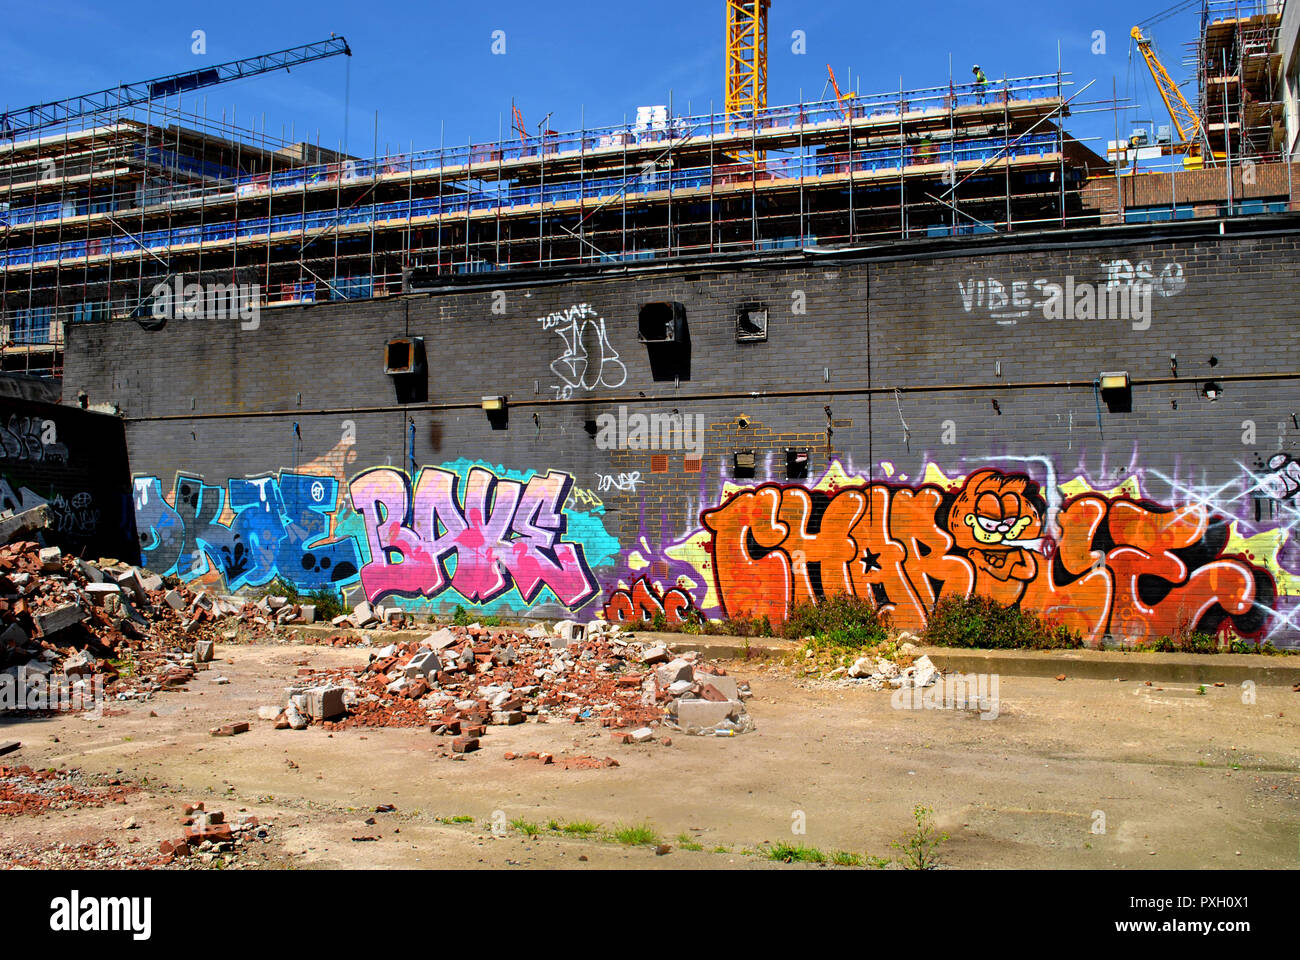 The 2 faces of 2018 Hackney Wick, east London. building works & graffiti.New apartments being built in Hackney Wick , east London. Stock Photo